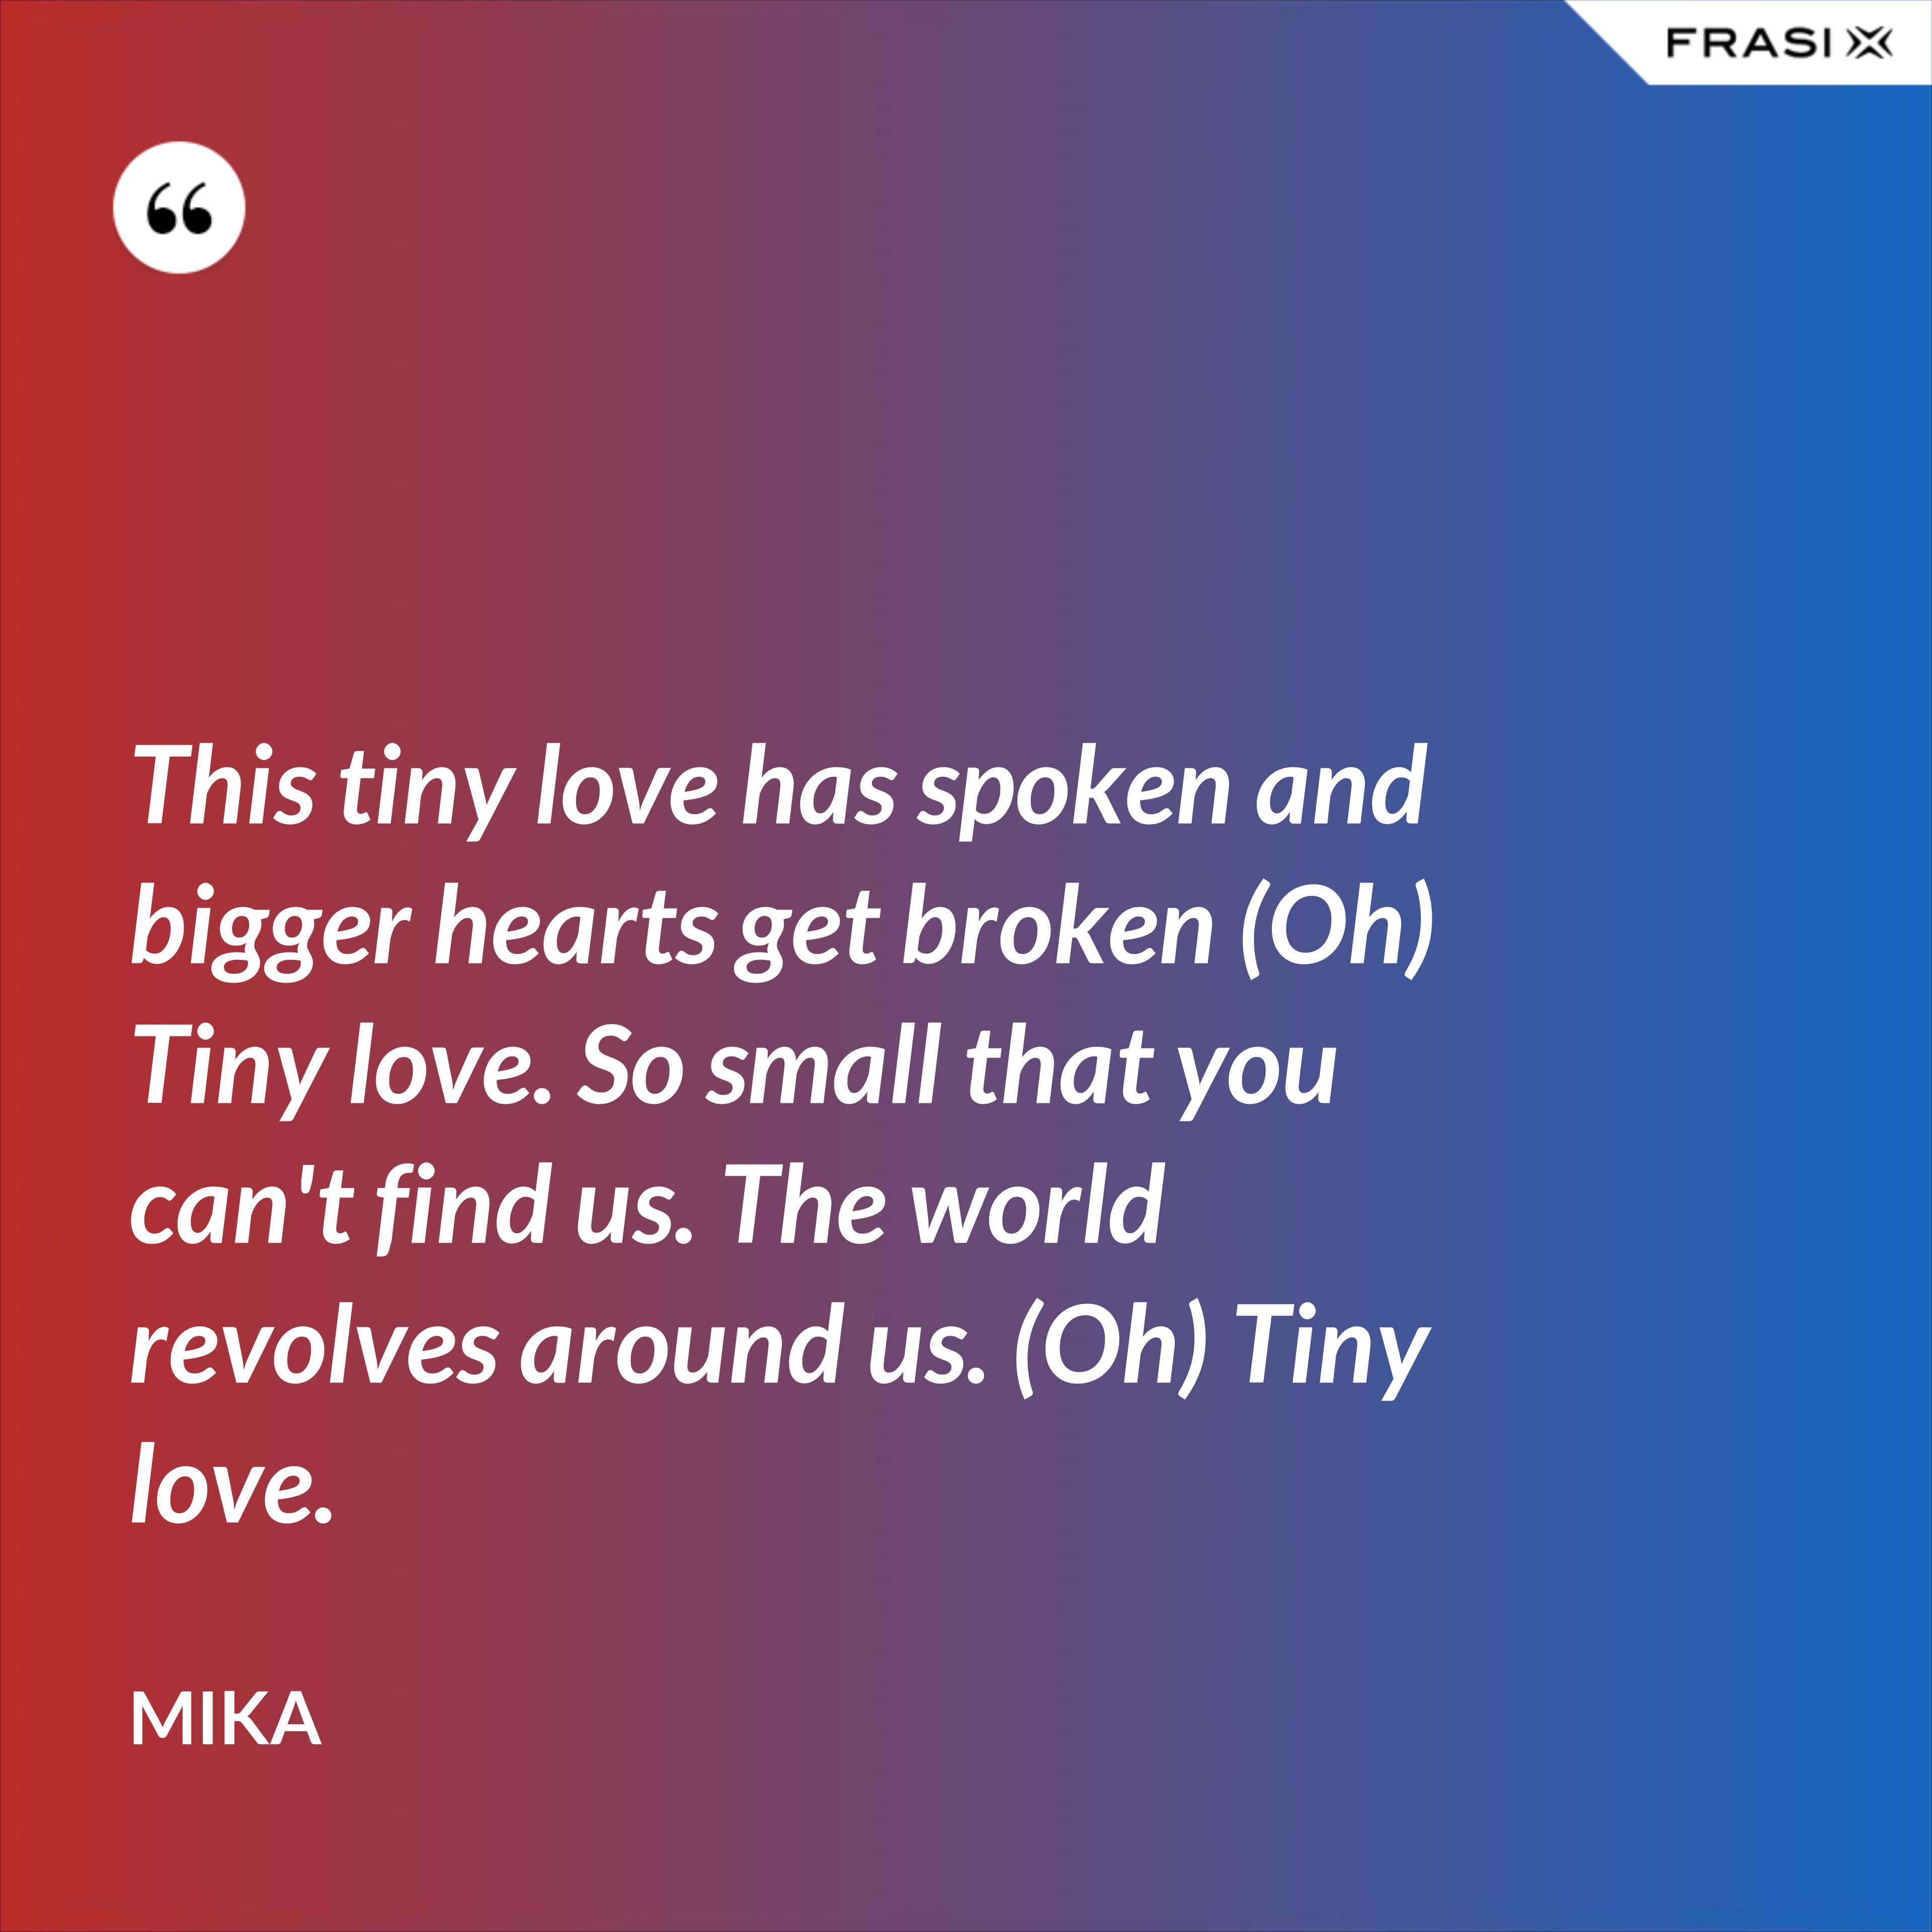 This tiny love has spoken and bigger hearts get broken (Oh) Tiny love. So small that you can't find us. The world revolves around us. (Oh) Tiny love. - Mika